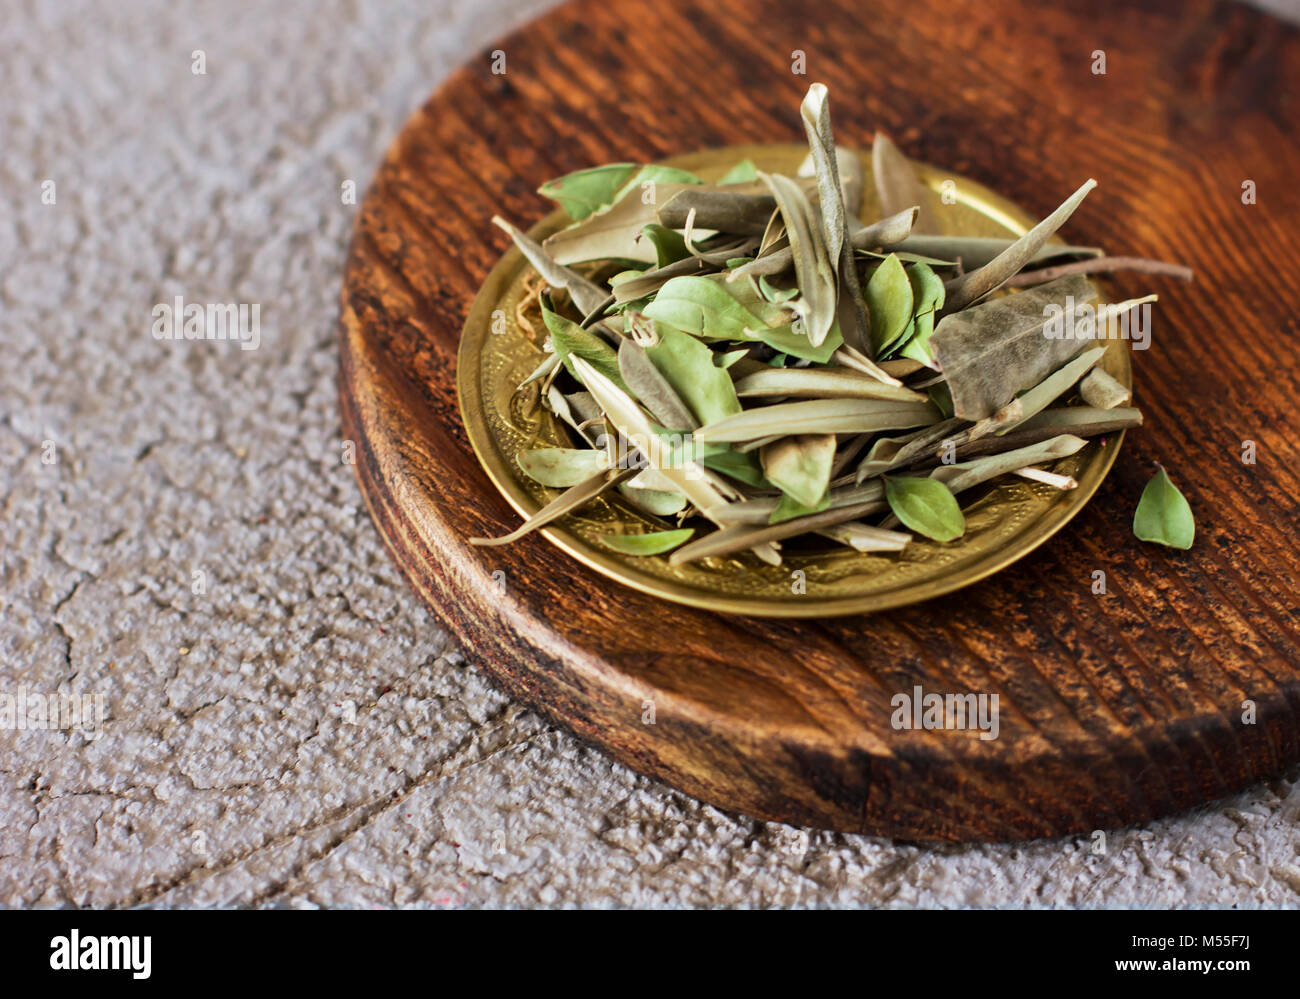 Dry olive Bay leaves in a copper plate on a wooden Board Stock Photo